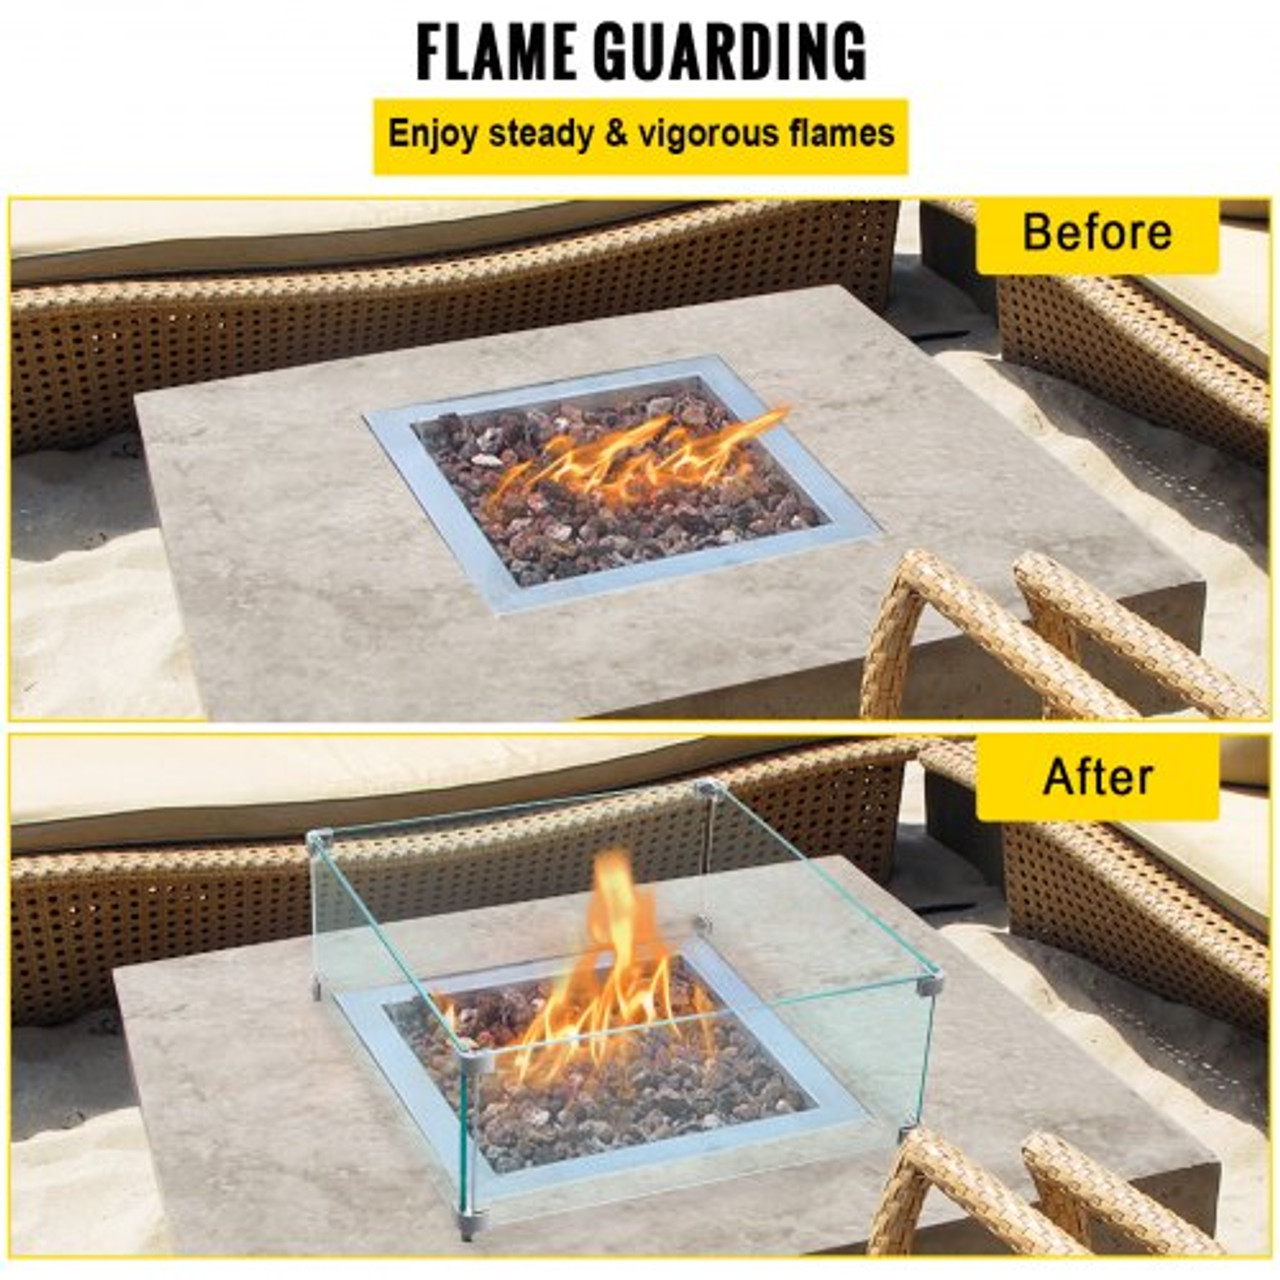 Fire Pit Wind Guard, 14 x 14 x 6 Inch Glass Wind Guard, Rectangular Glass Shield, 0.3" Thick Fire Table, Clear Tempered Glass Flame Guard, Steady Feet Tree Pit Guard for Propane, Gas, Outdoor